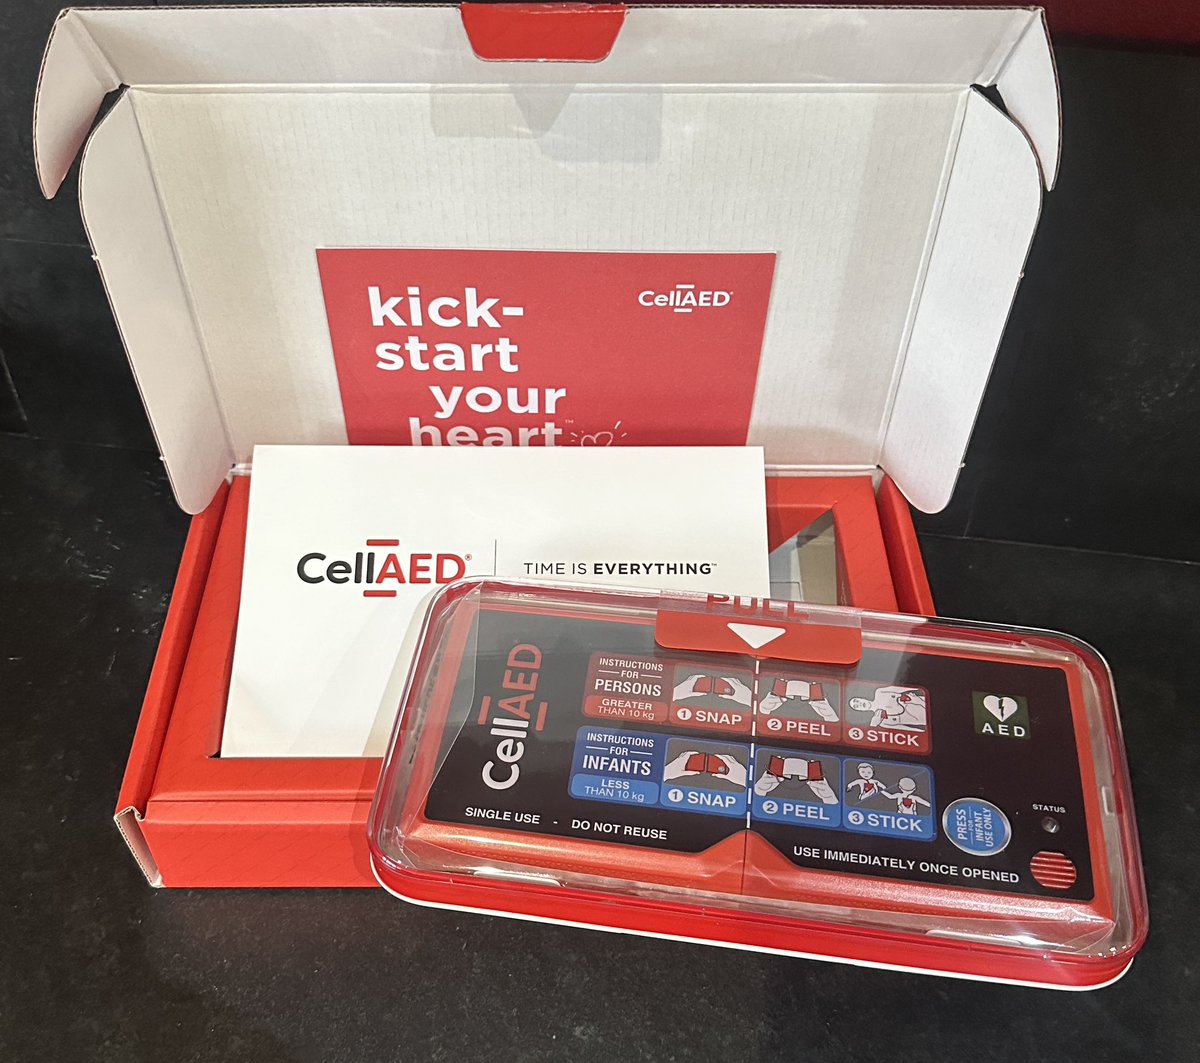 @FireWise_UK have just added this fantastic @CellAED to our First Aid & Trauma kit ensuring the safety of our team & delegates in our dynamic training environments ⚡️❤️👍